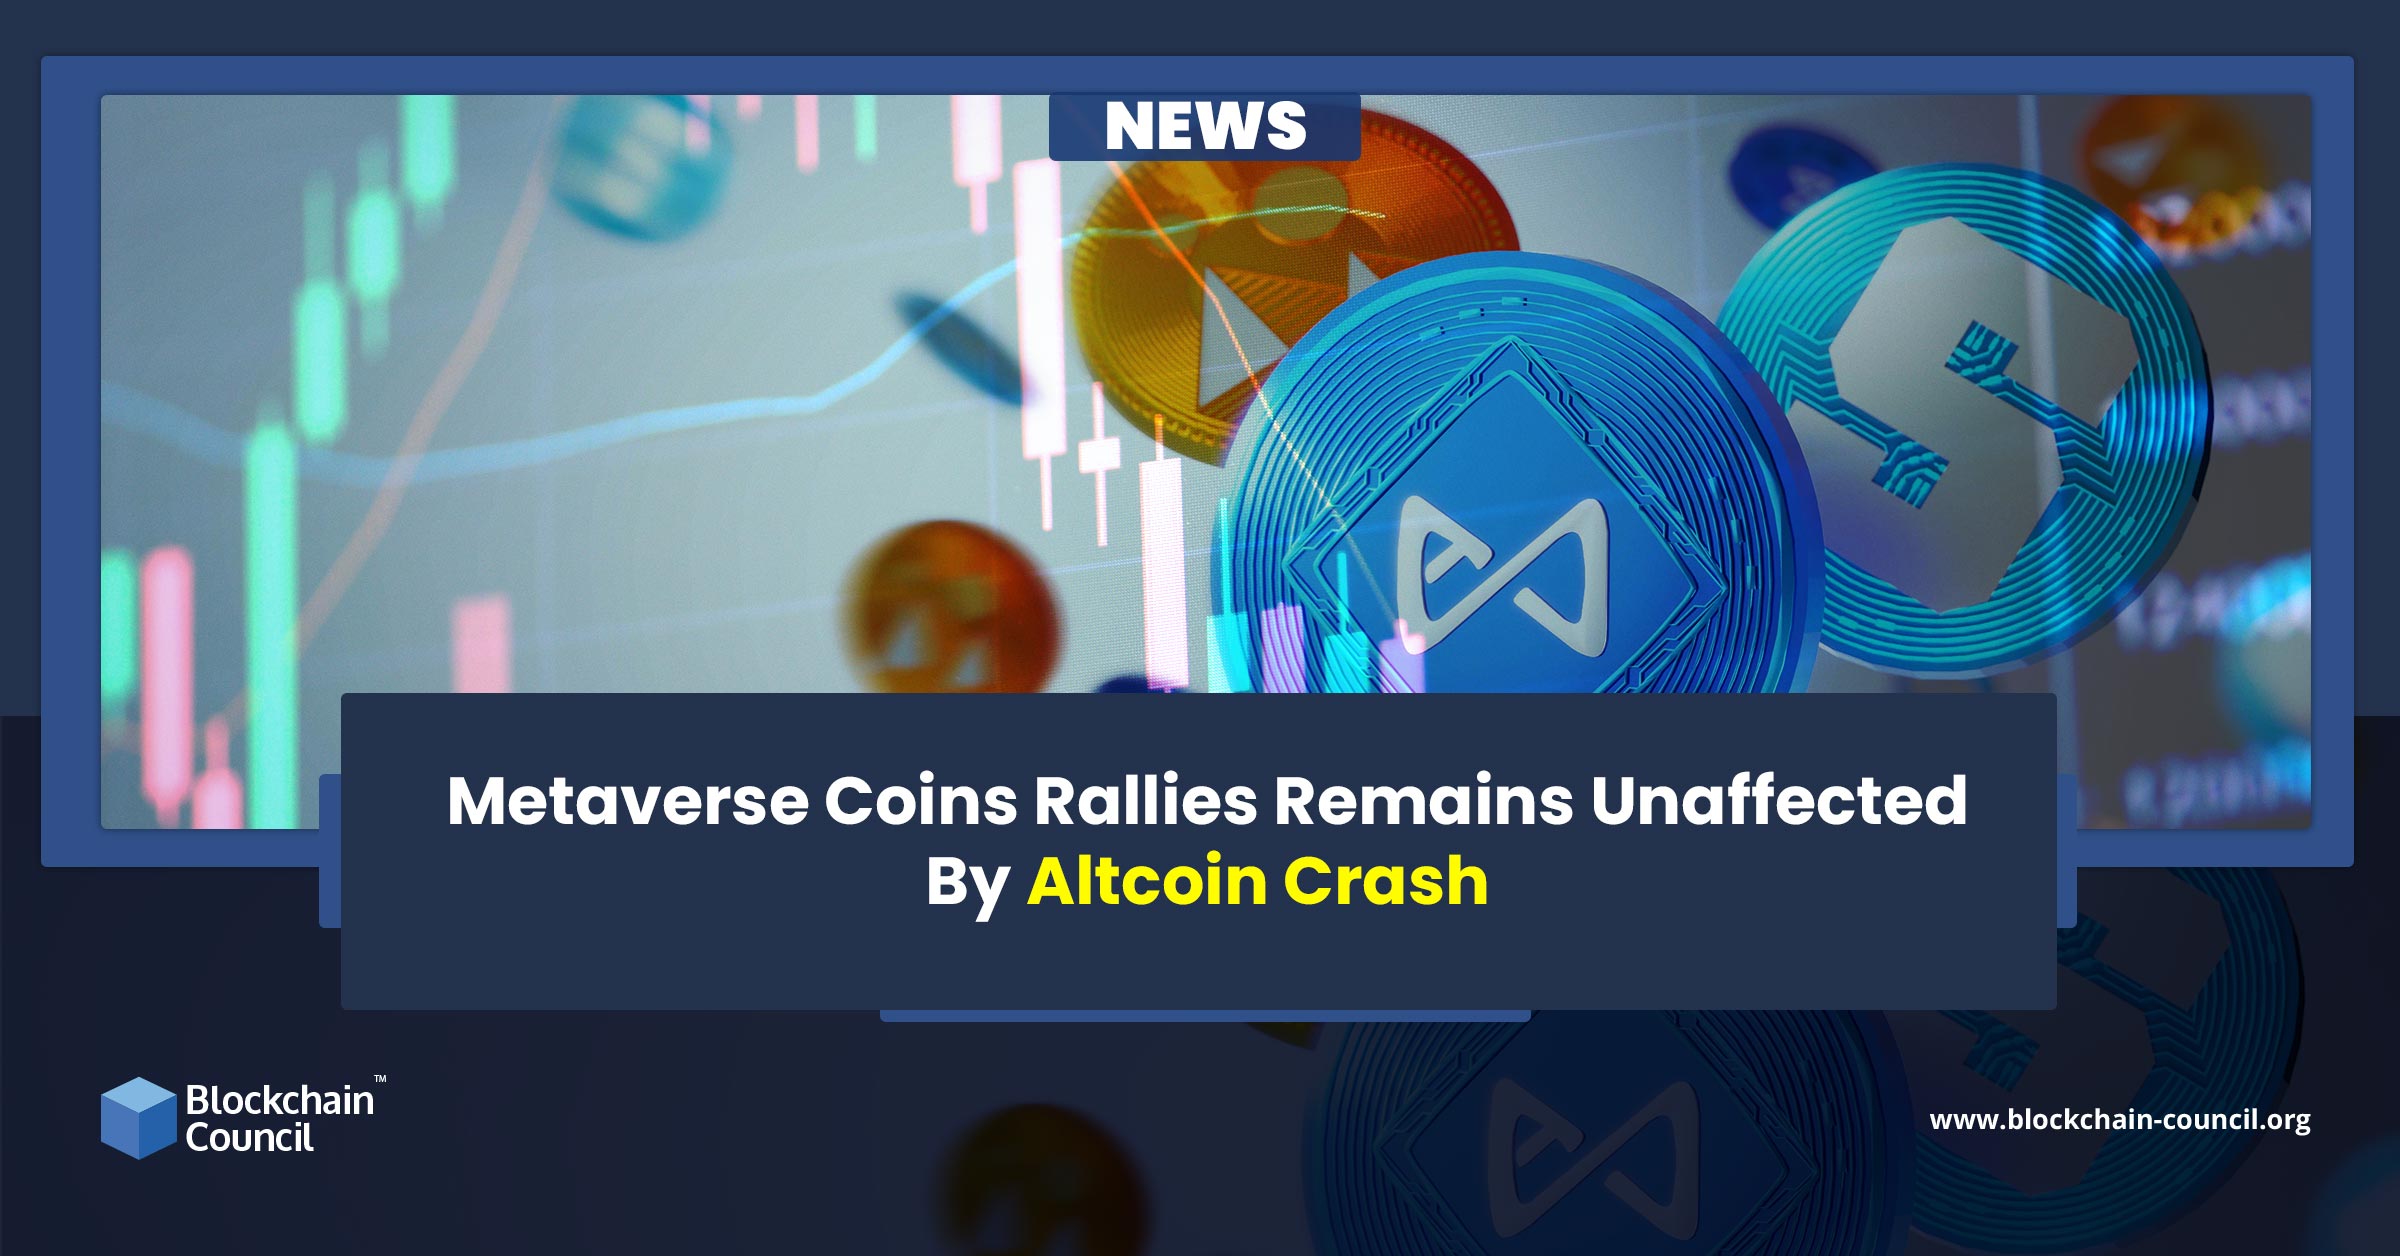 Metaverse Coins Rallies Remains Unaffected By Altcoin Crash